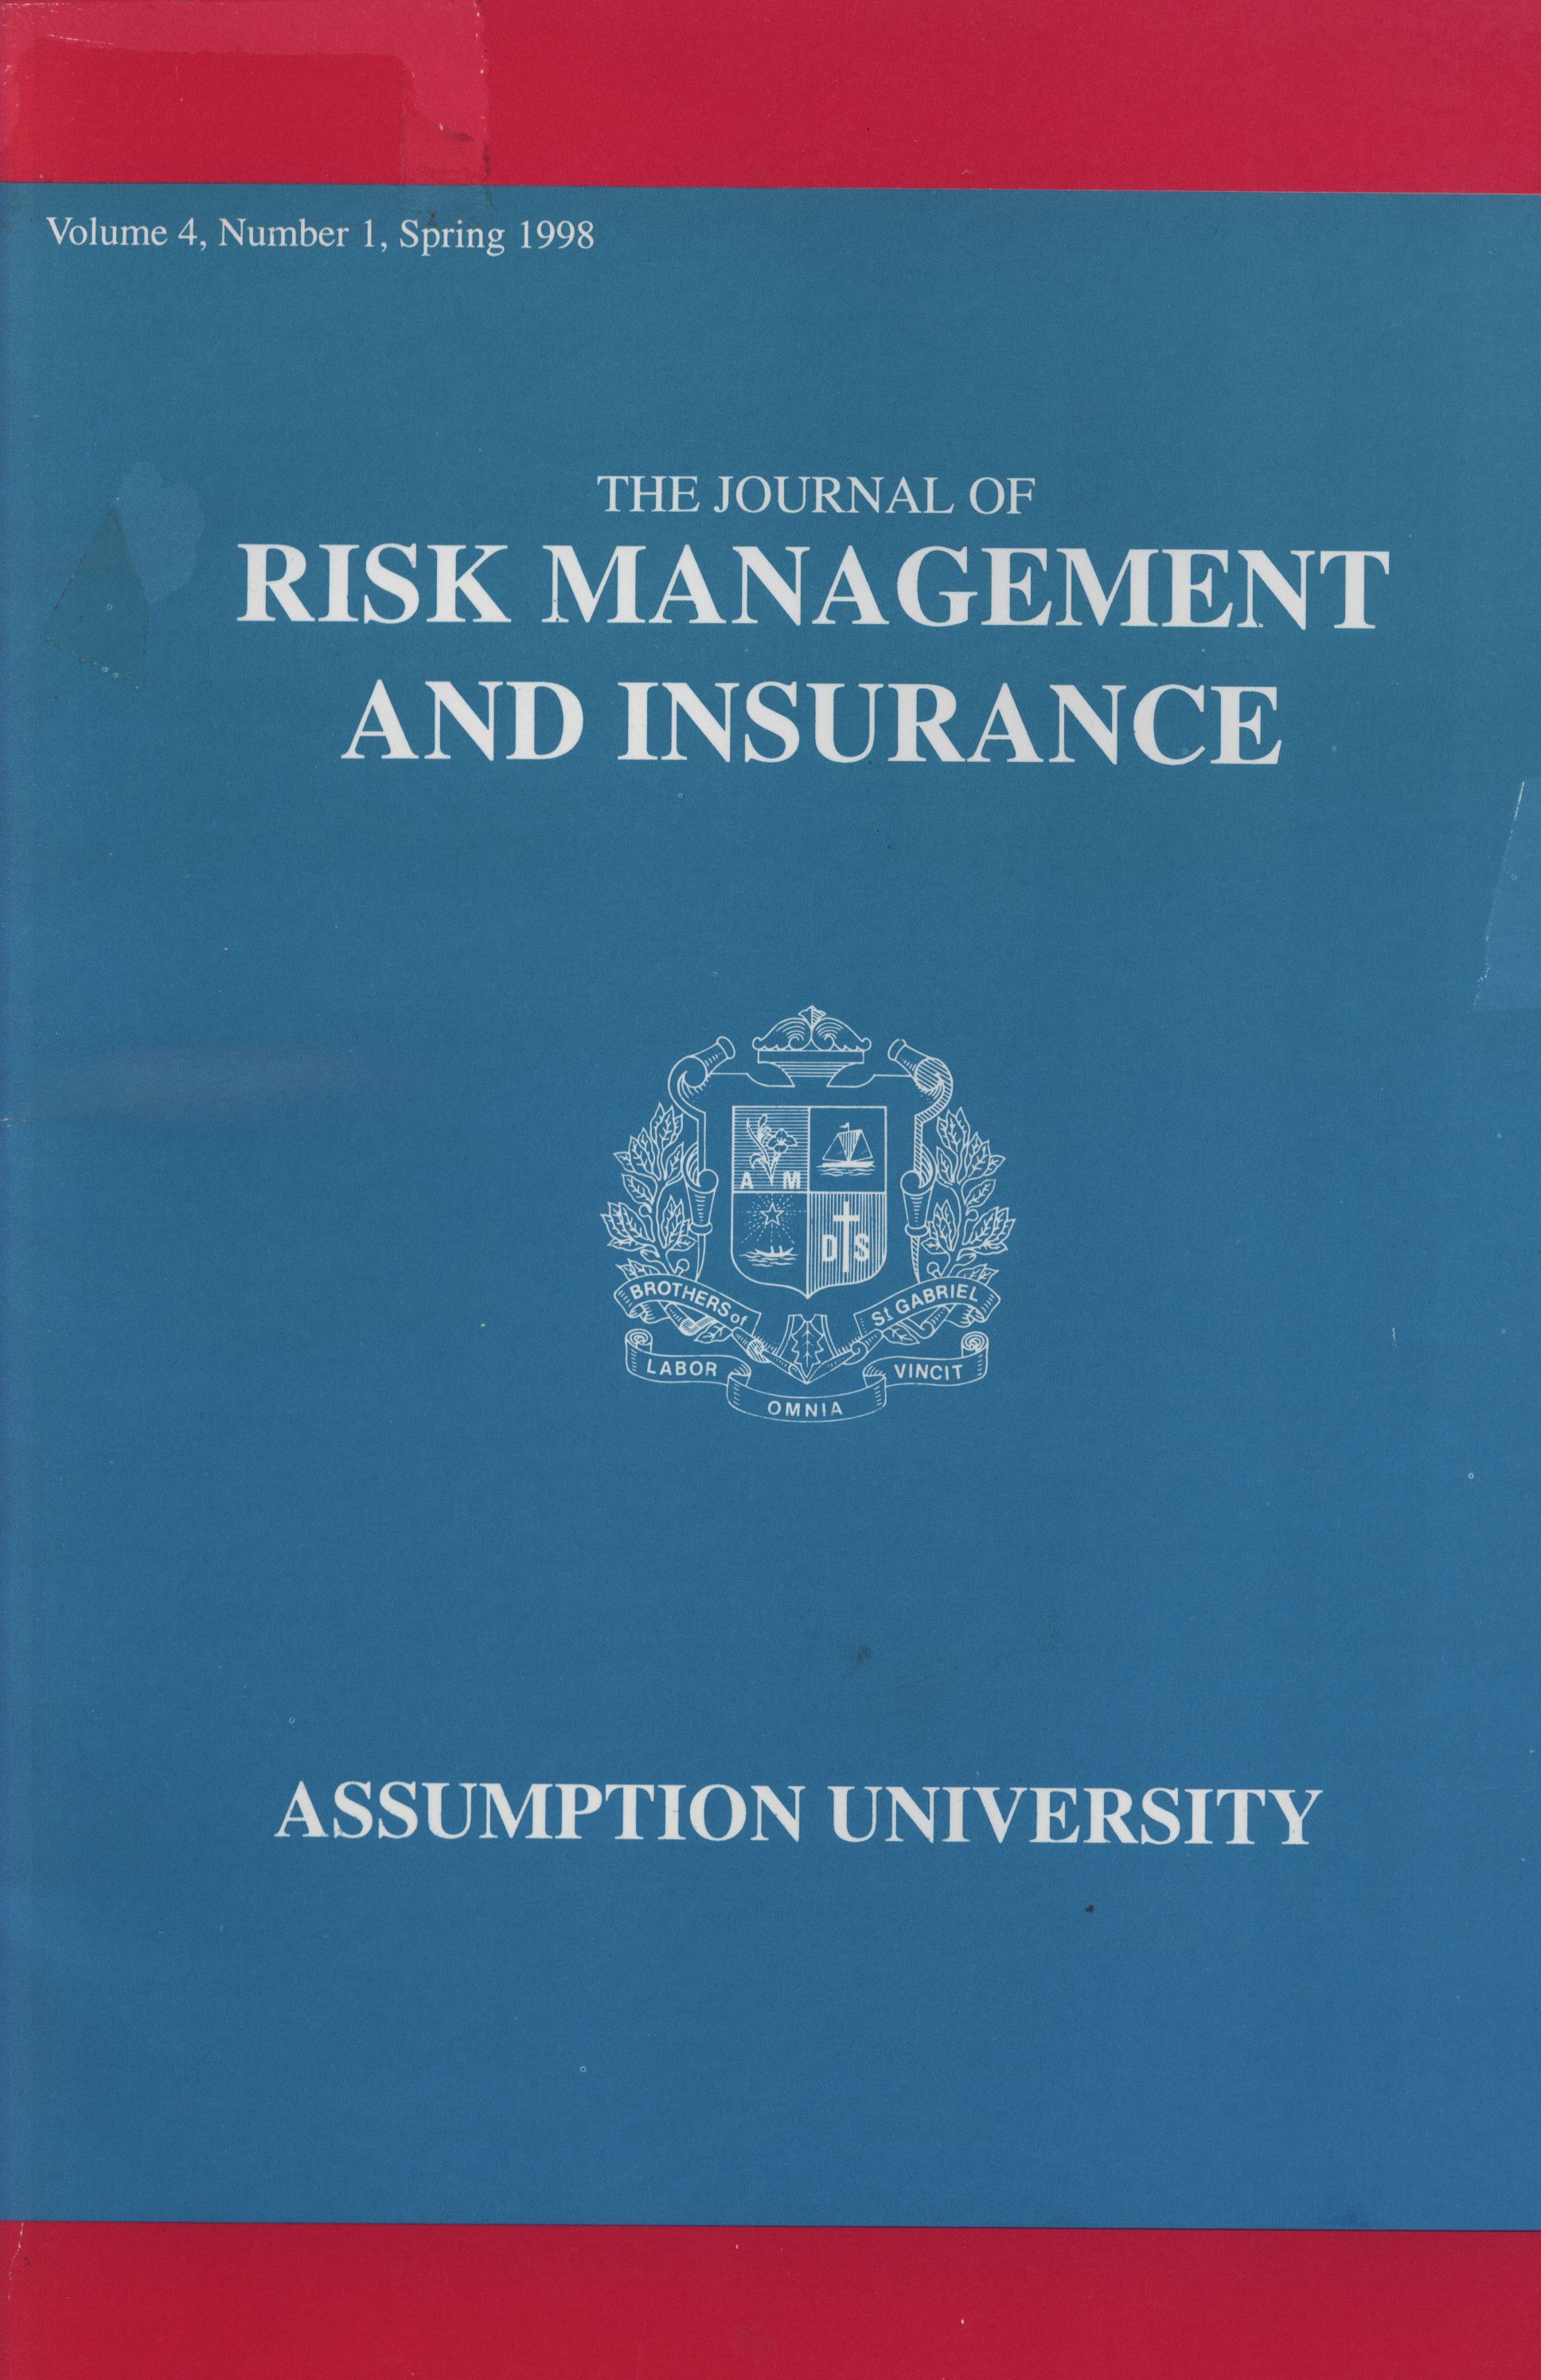 					View Vol. 4 No. 1 (1998): The Journal of Risk Management and Insurance
				